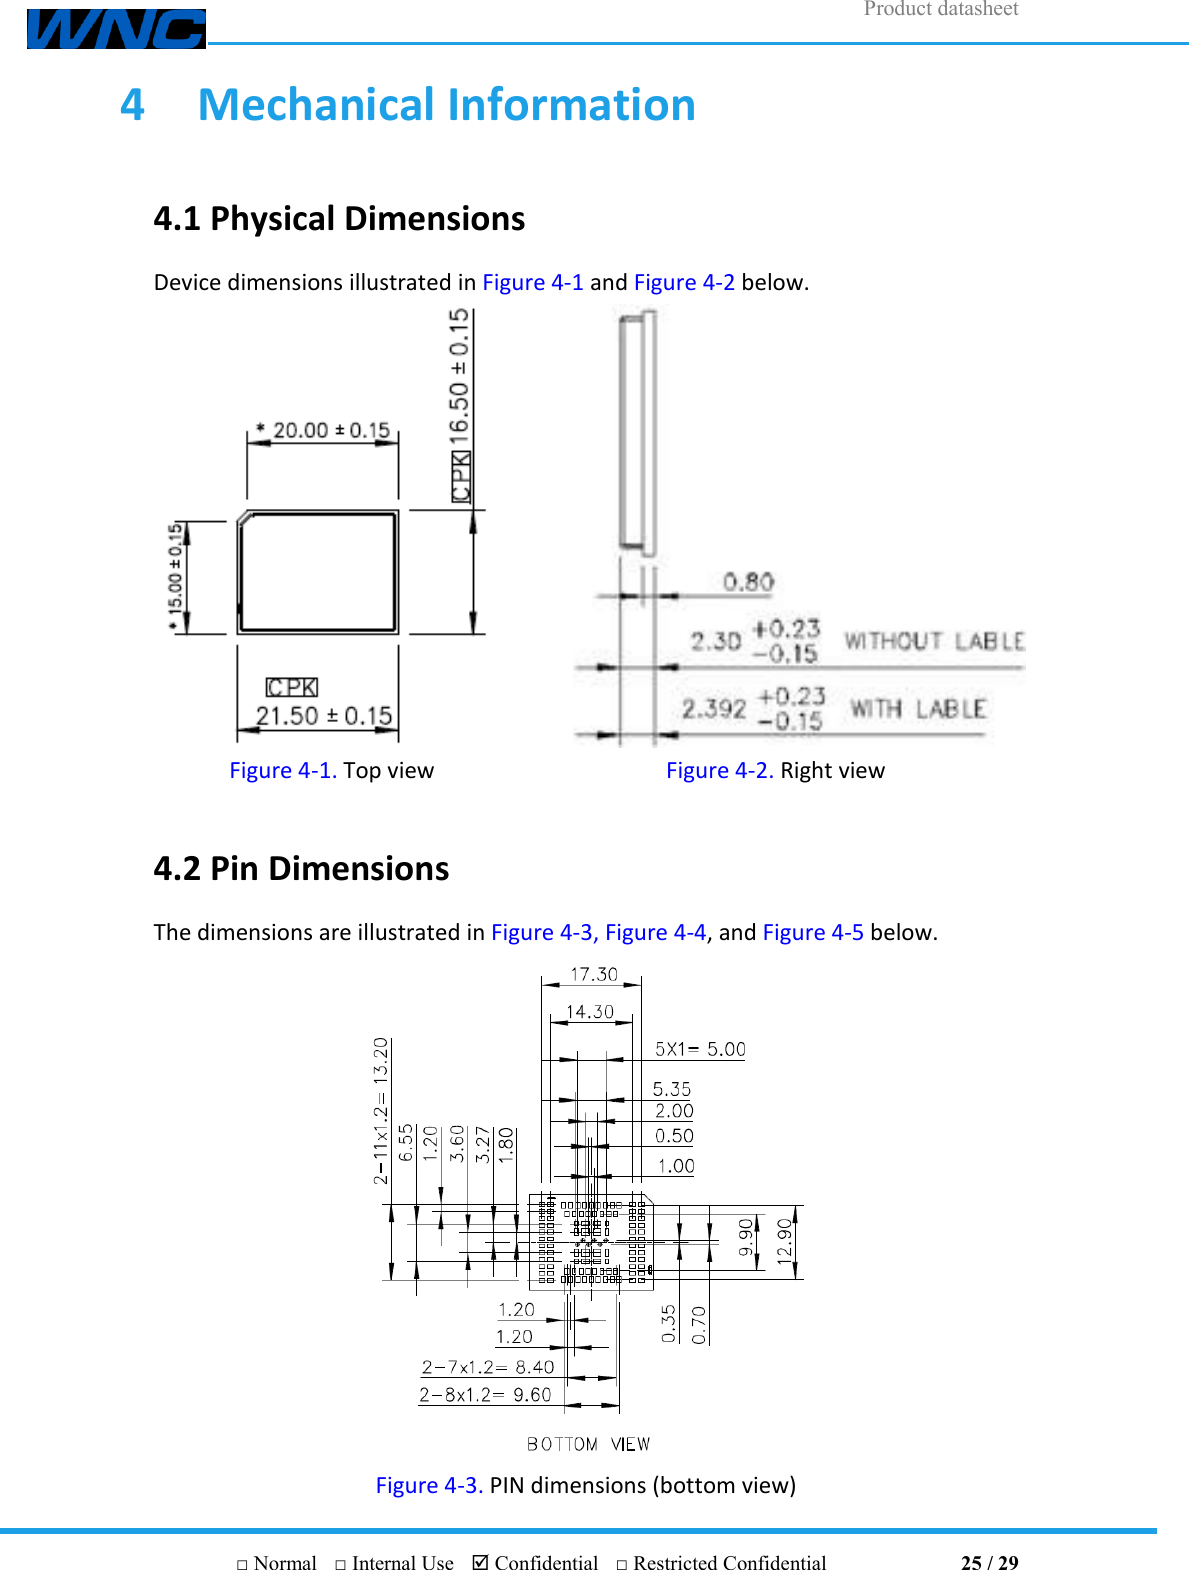 Product datasheet       □ Normal  □ Internal Use   Confidential  □ Restricted Confidential                                25 / 29 4  Mechanical Information 4.1 Physical Dimensions Device dimensions illustrated in Figure 4-1 and Figure 4-2 below.   Figure 4-1. Top view Figure 4-2. Right view  4.2 Pin Dimensions The dimensions are illustrated in Figure 4-3, Figure 4-4, and Figure 4-5 below.  Figure 4-3. PIN dimensions (bottom view) 